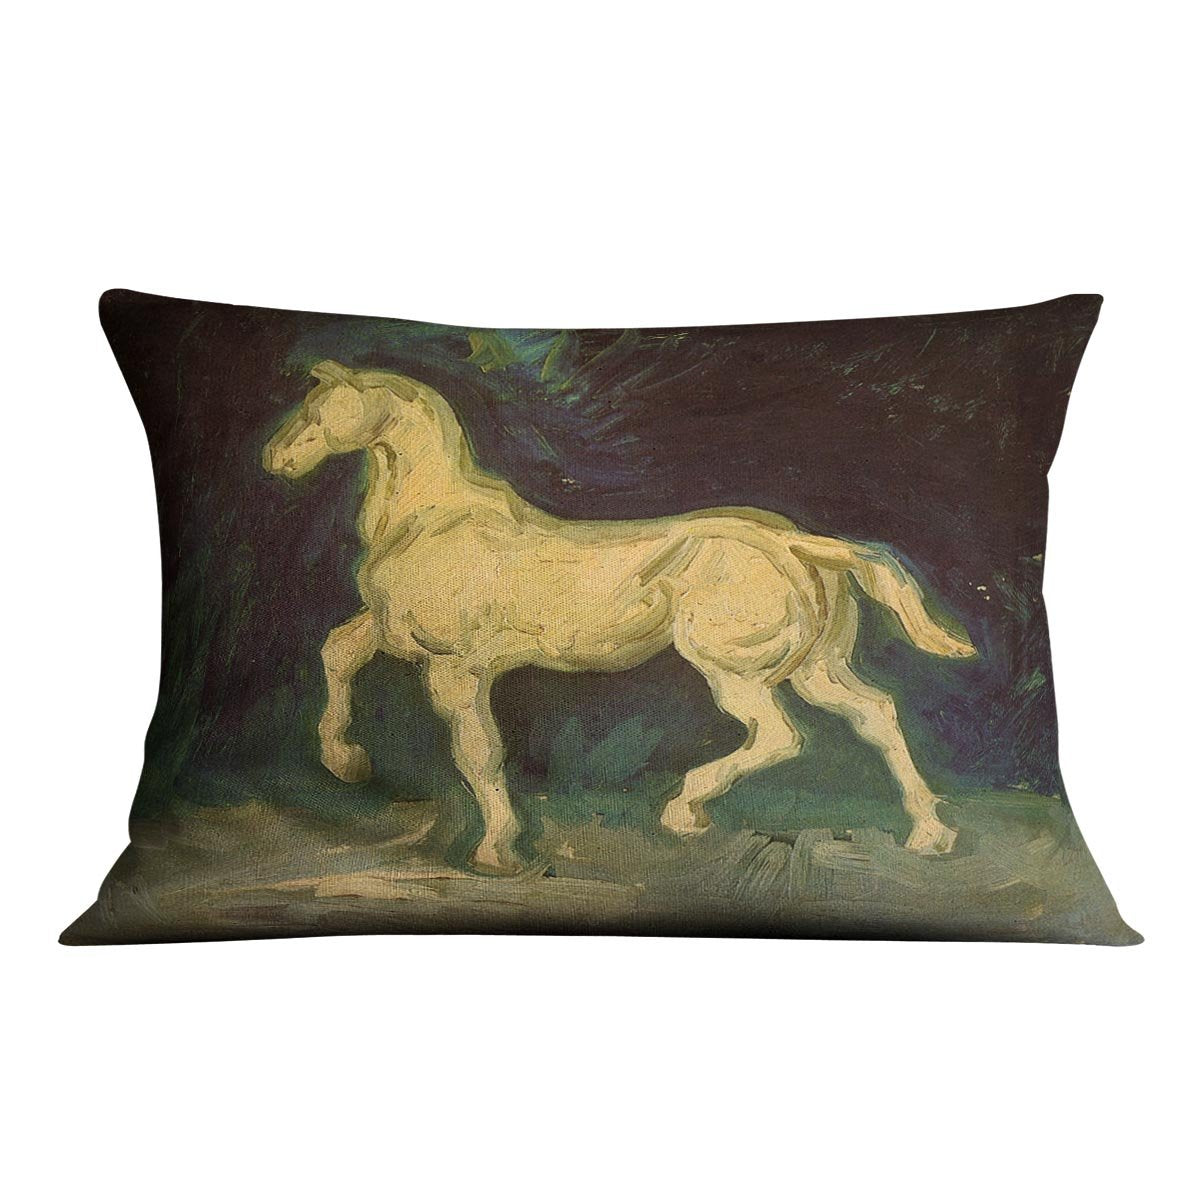 Plaster Statuette of a Horse by Van Gogh Throw Pillow